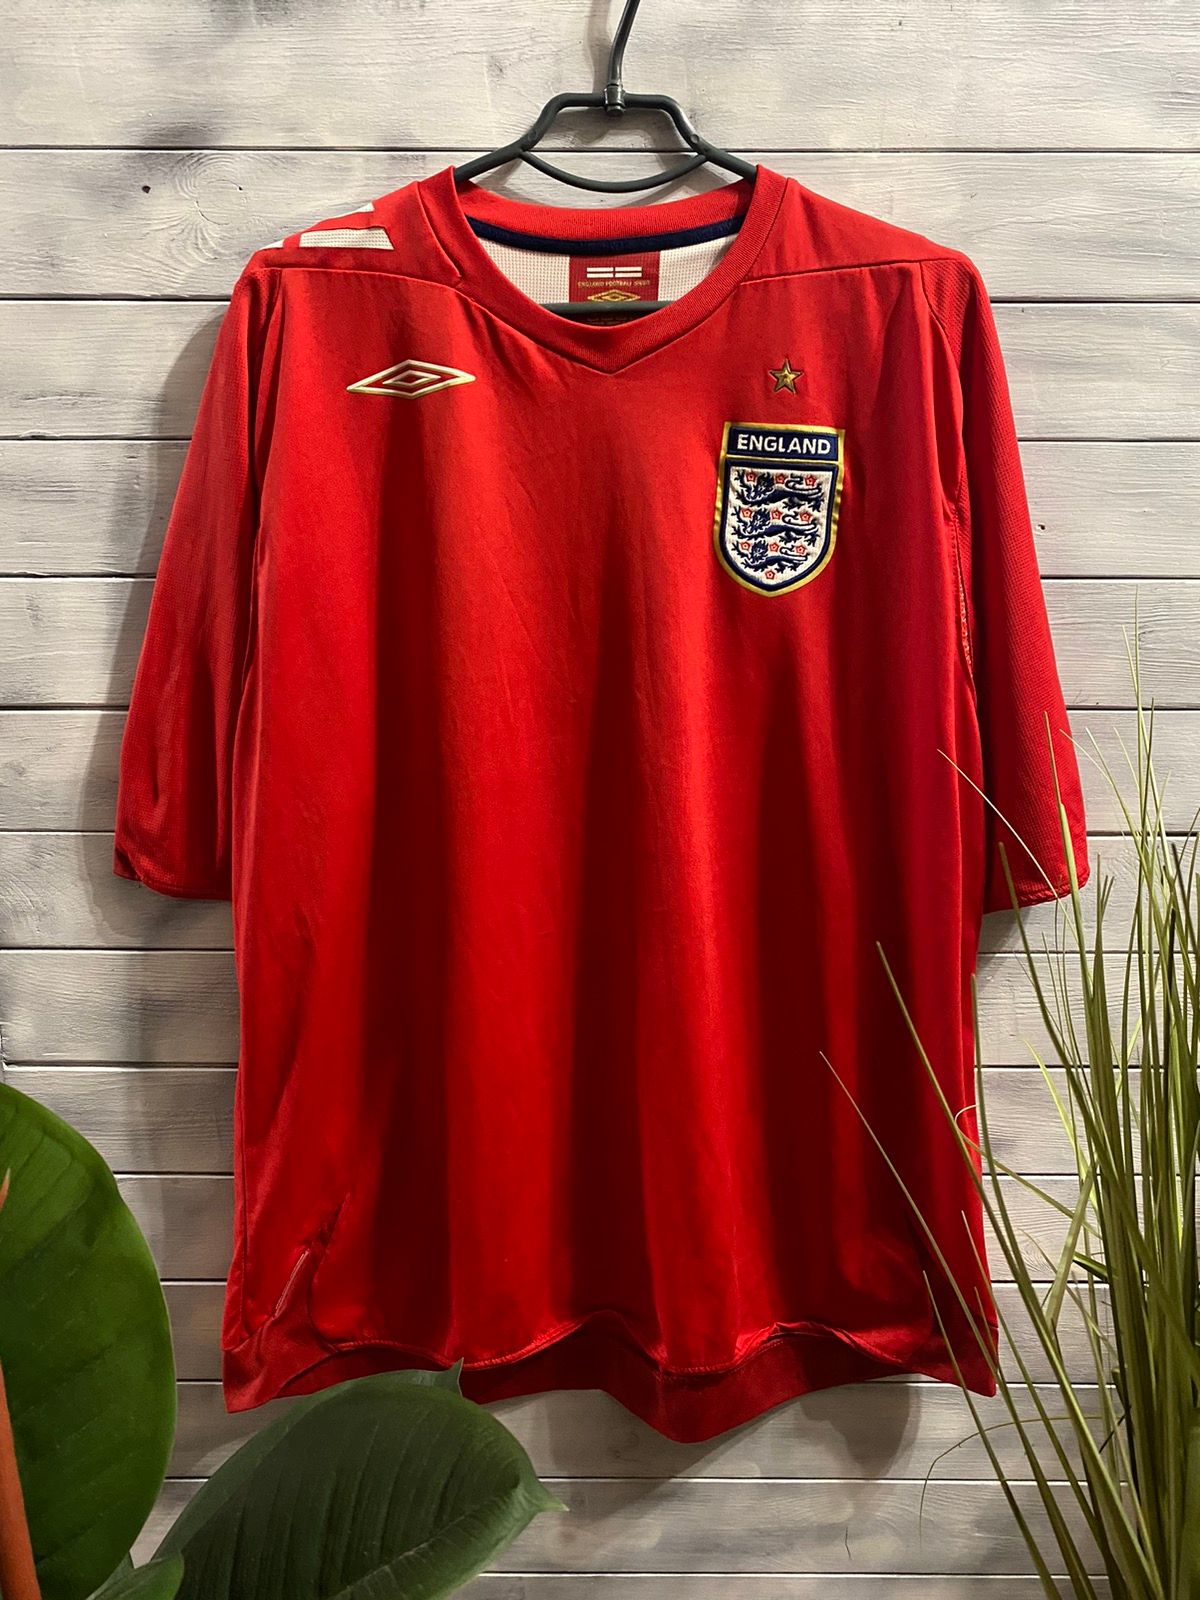 Pre-owned Soccer Jersey X Umbro Vintage Soccer Jersey England 2006-2008 Umbro. Football In Red